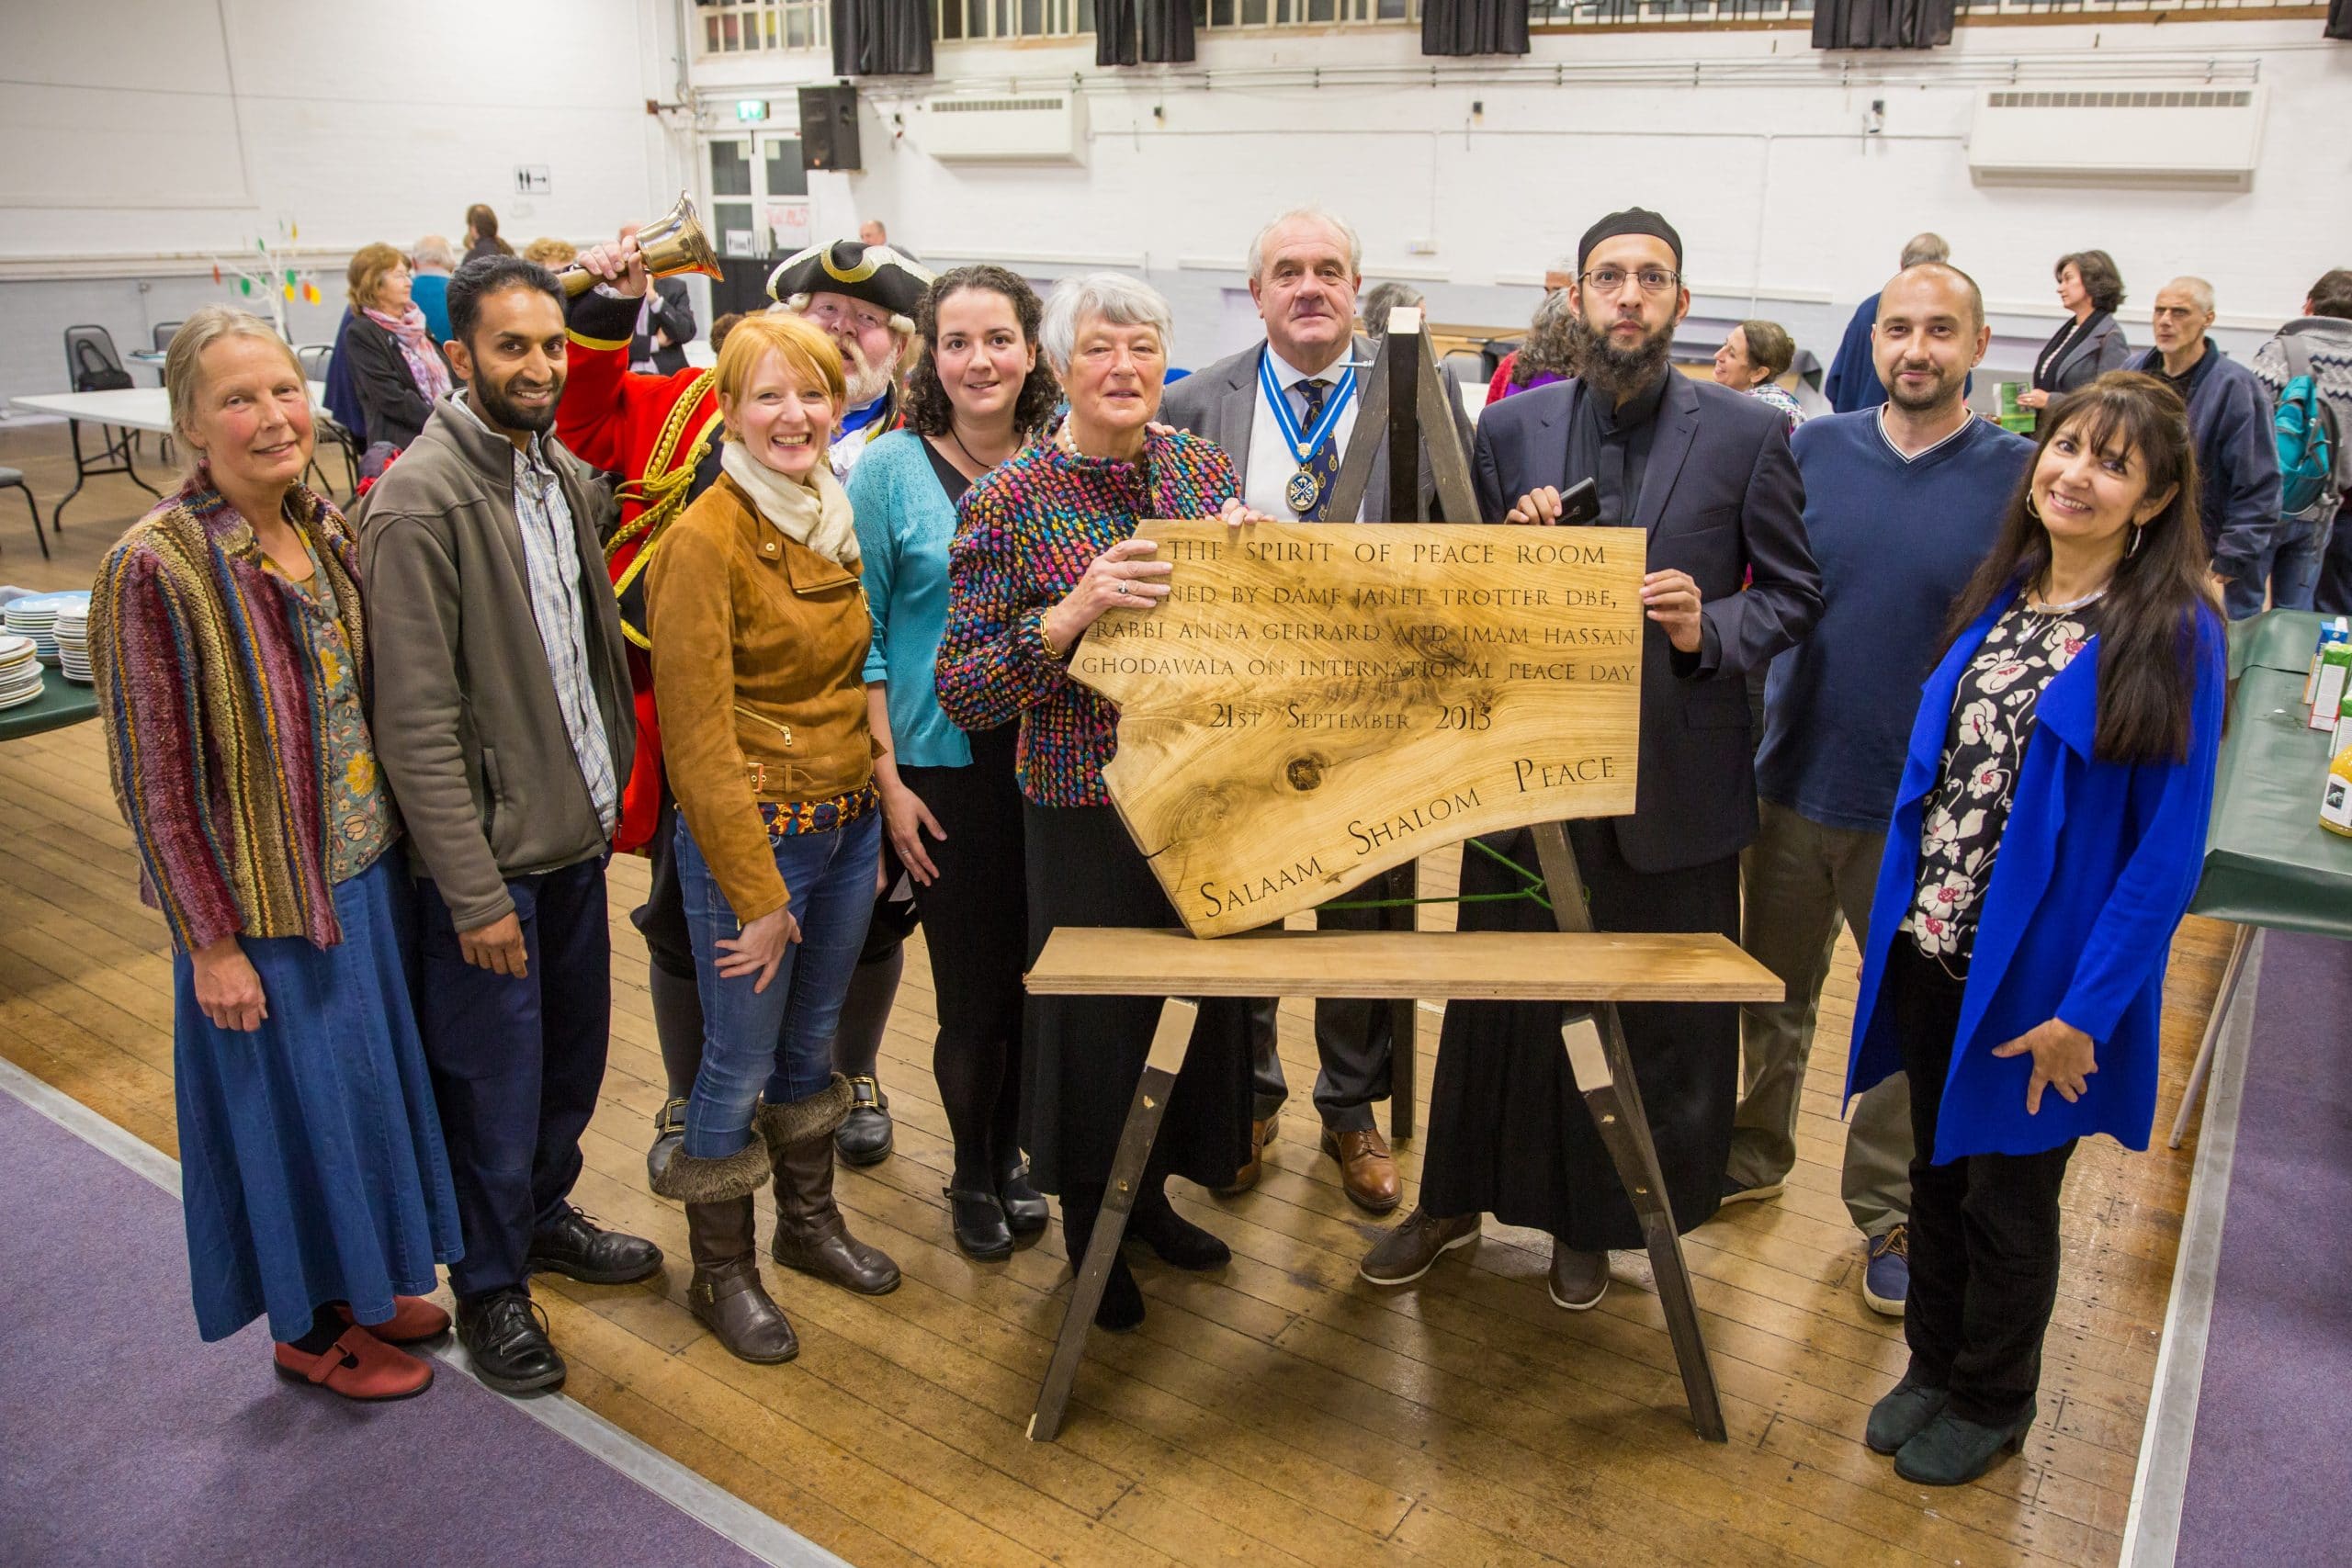 A group of people stands holding a wooden plaque which reads 'Salaam, Shalom, Peace'